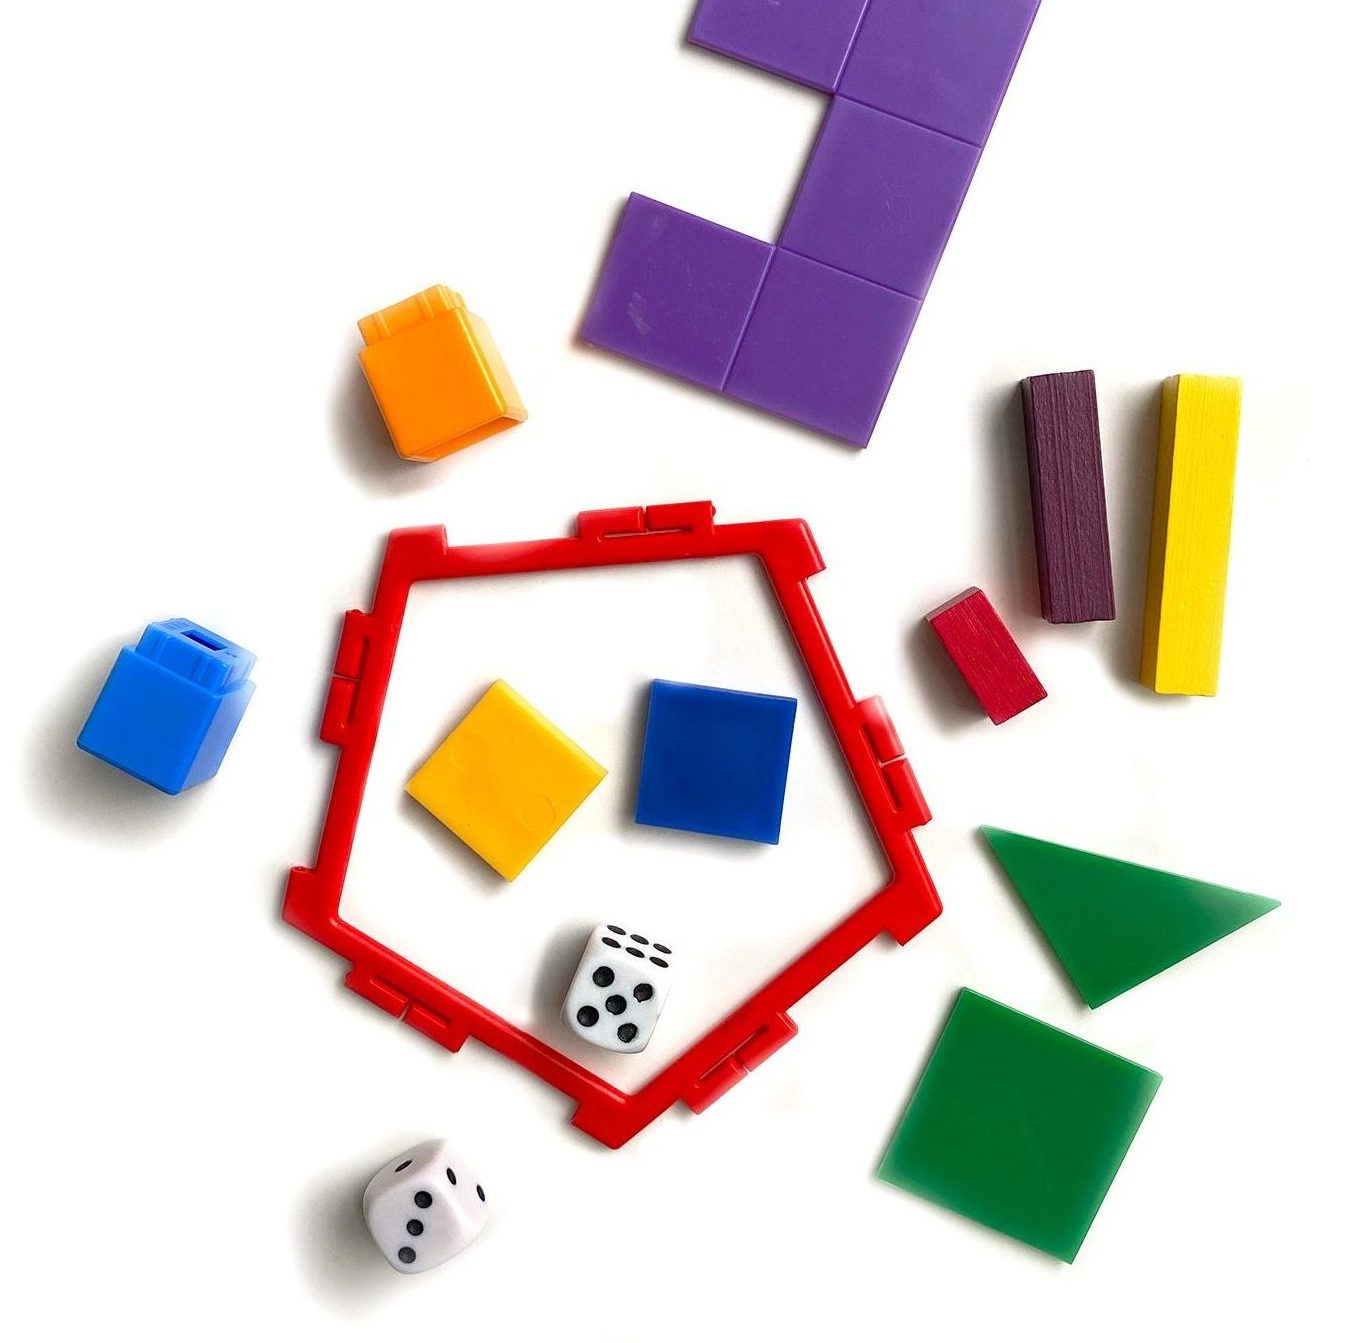 What Manipulatives Can Be Used To Teach Fractions